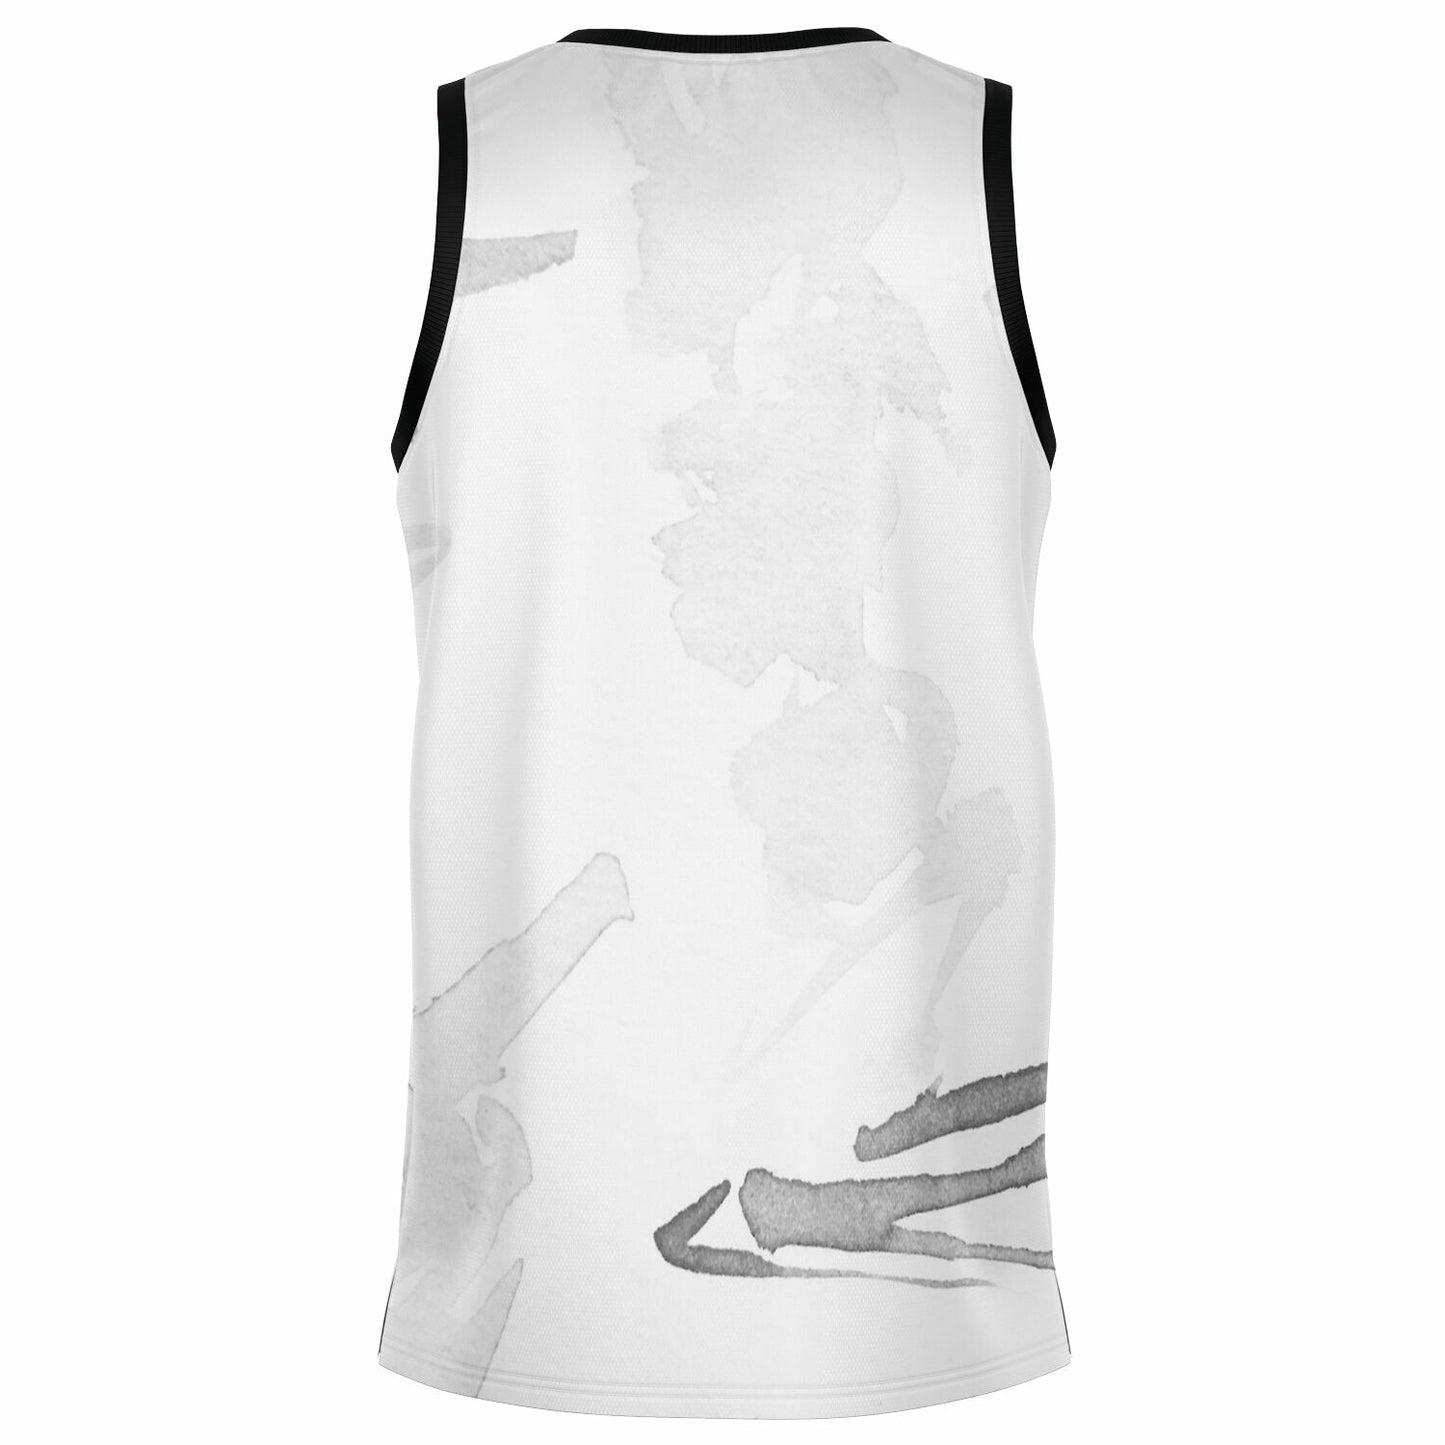 Adult All Over Print Basketball Jersey